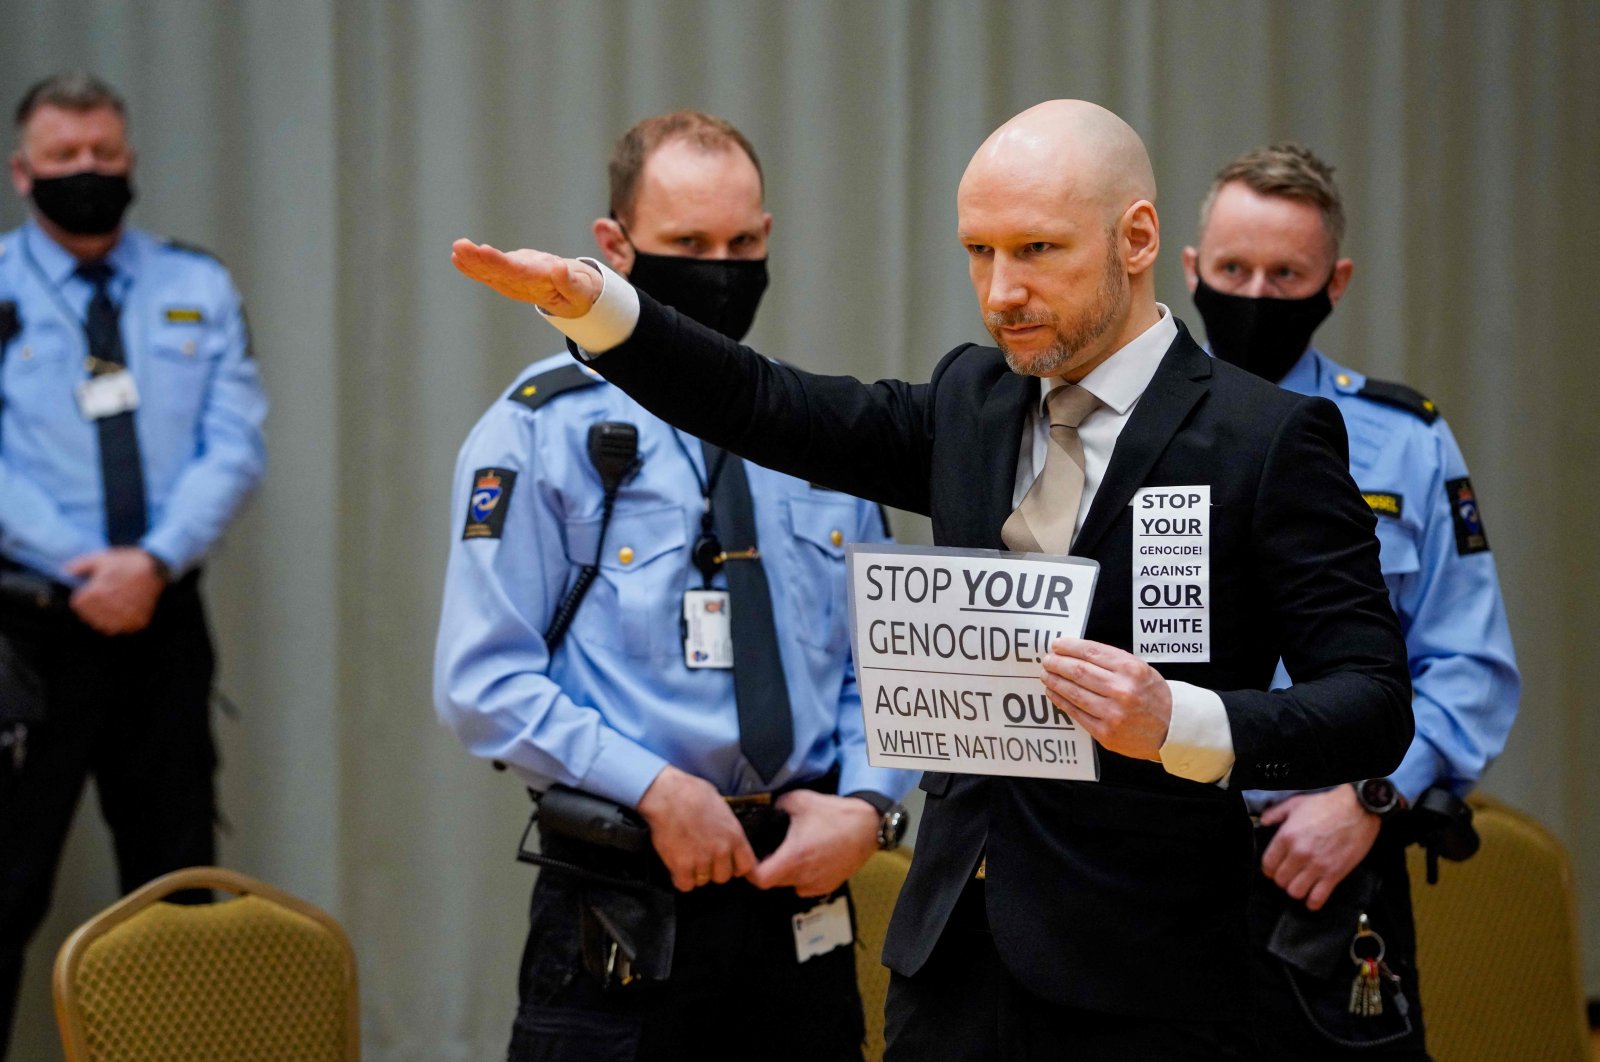 Anders Behring Breivik raises his arm to do the Nazi salute as he arrives on the first day of the trial where he is requesting release on parole, at a makeshift courtroom in Skien prison, Norway, Jan. 18, 2022. (AFP Photo)